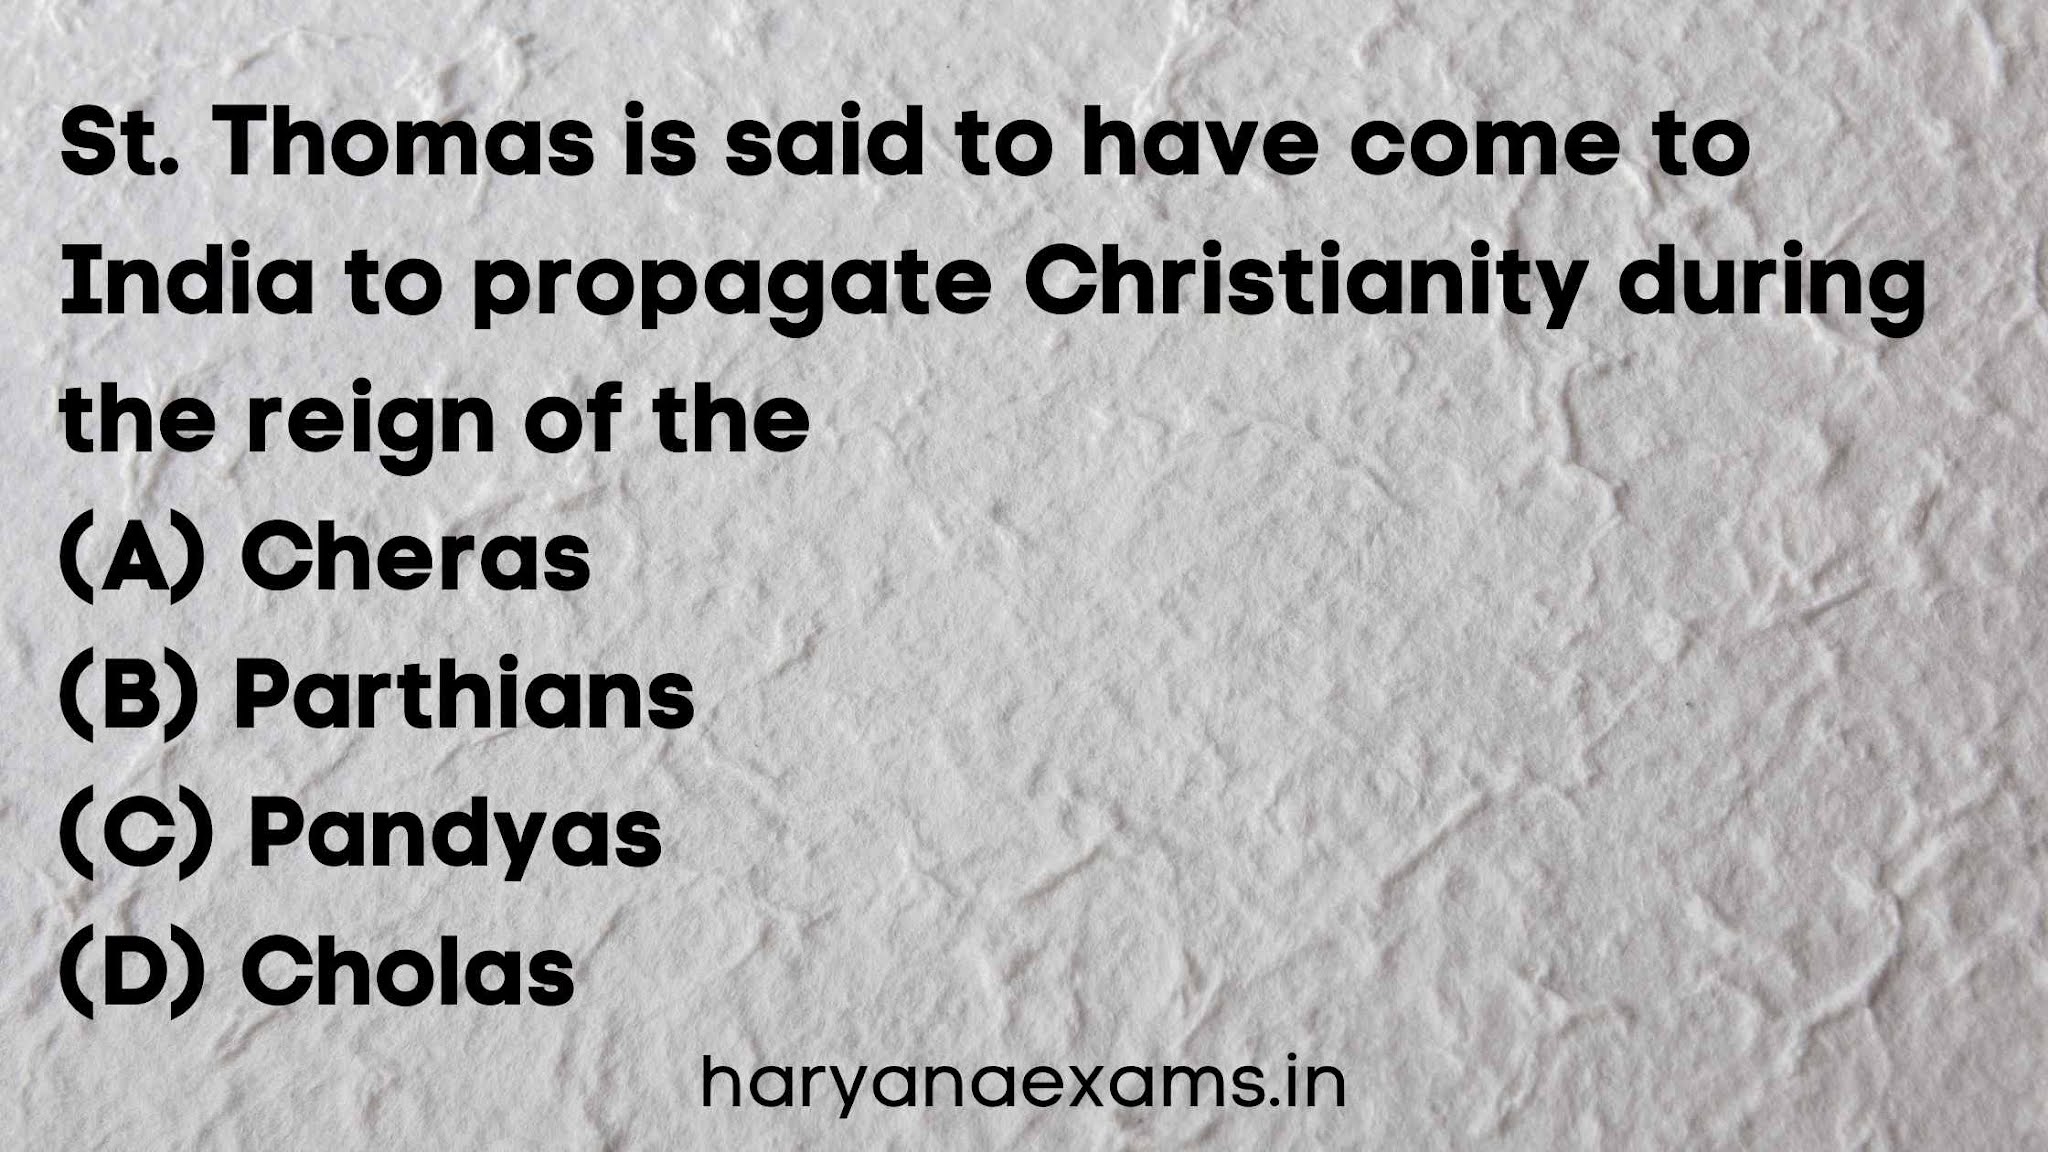 St. Thomas is said to have come to India to propagate Christianity during the reign of the   (A) Cheras   (B) Parthians   (C) Pandyas   (D) Cholas